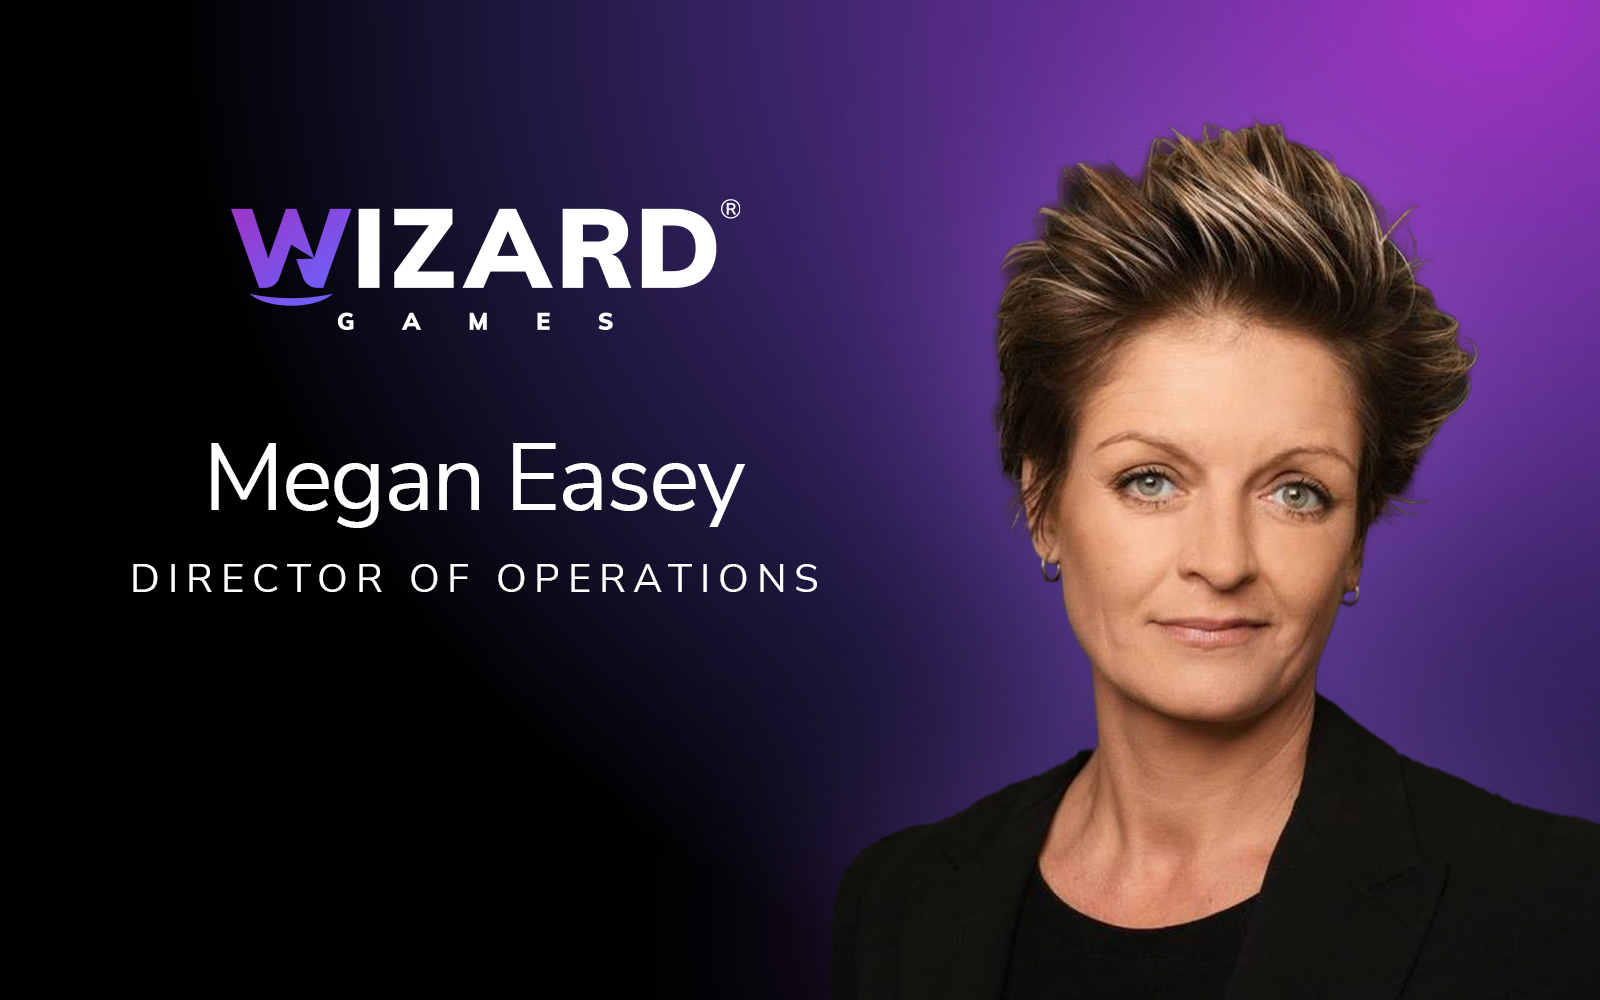 Wizard Games appoints Megan Easey as Director of Operations